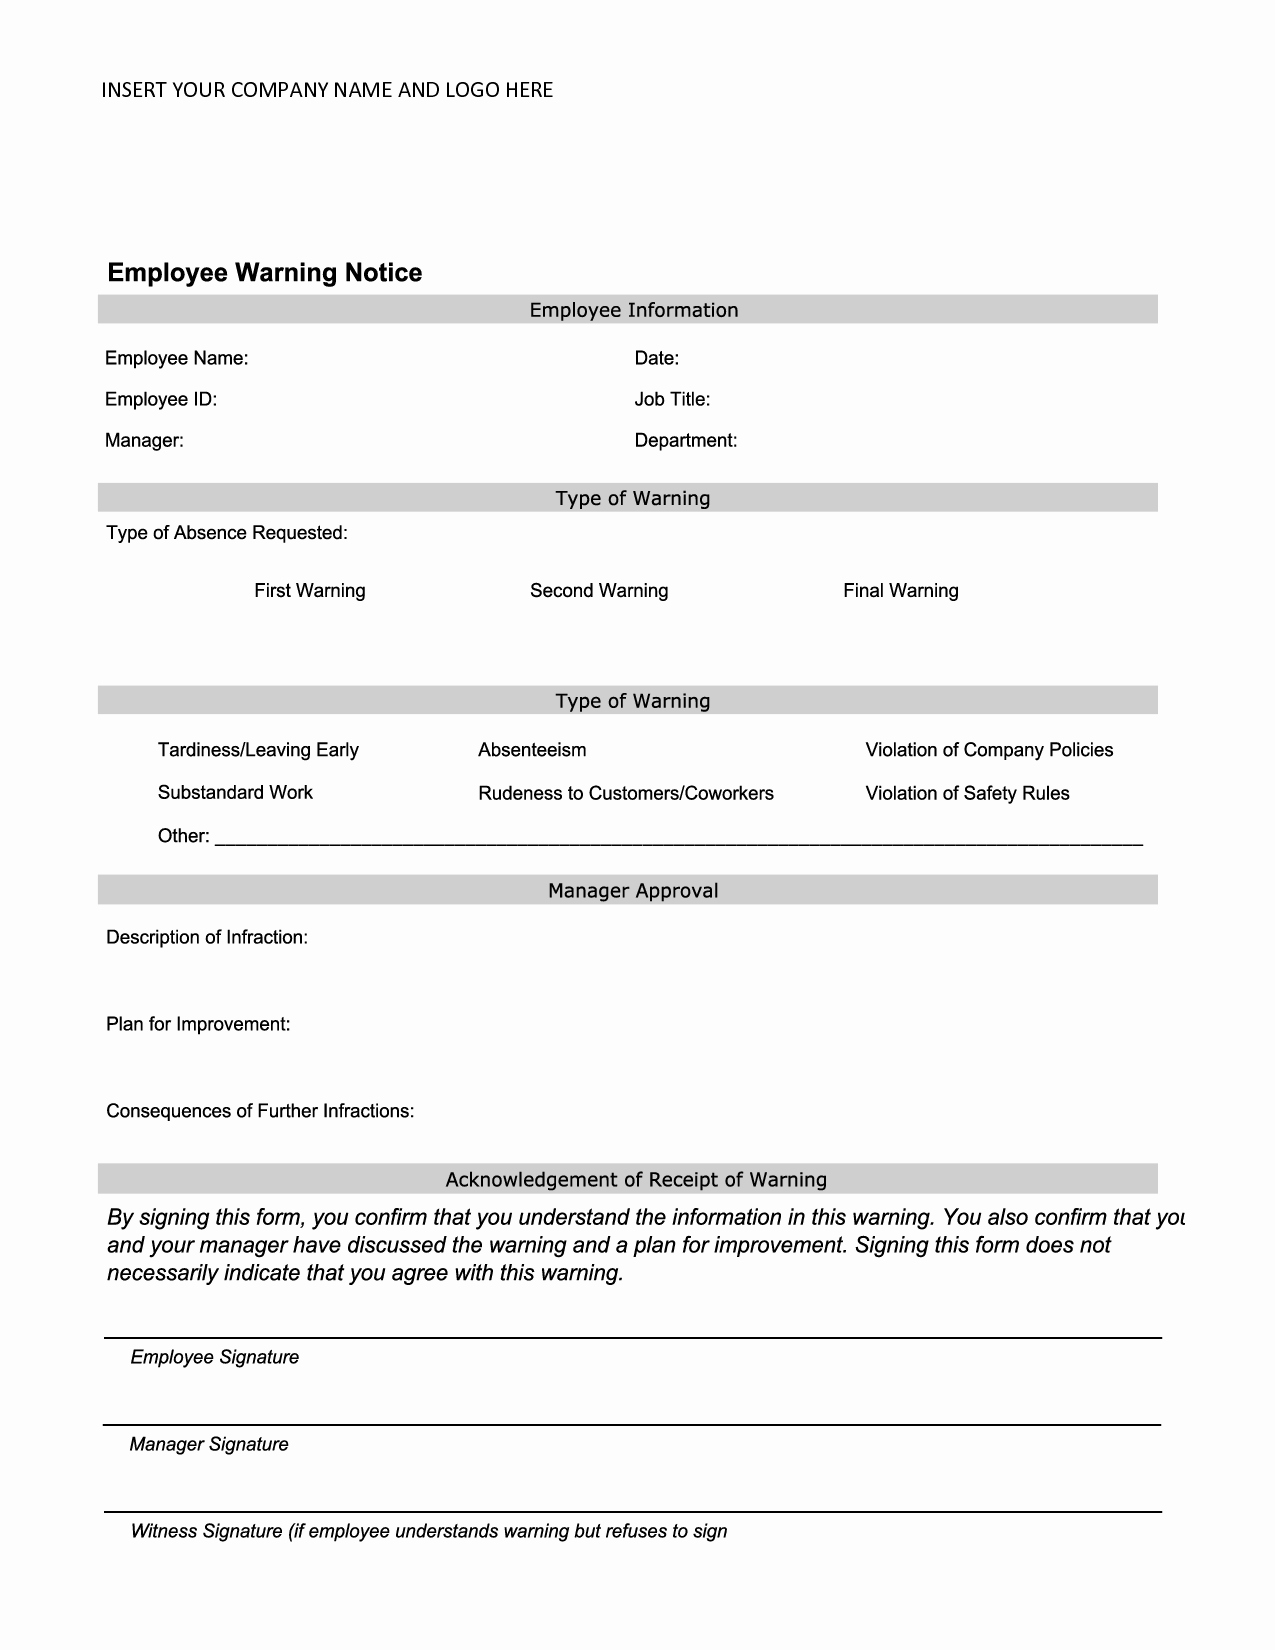 Human Resources Documents Template Elegant Employee Warning Notice Employee forms